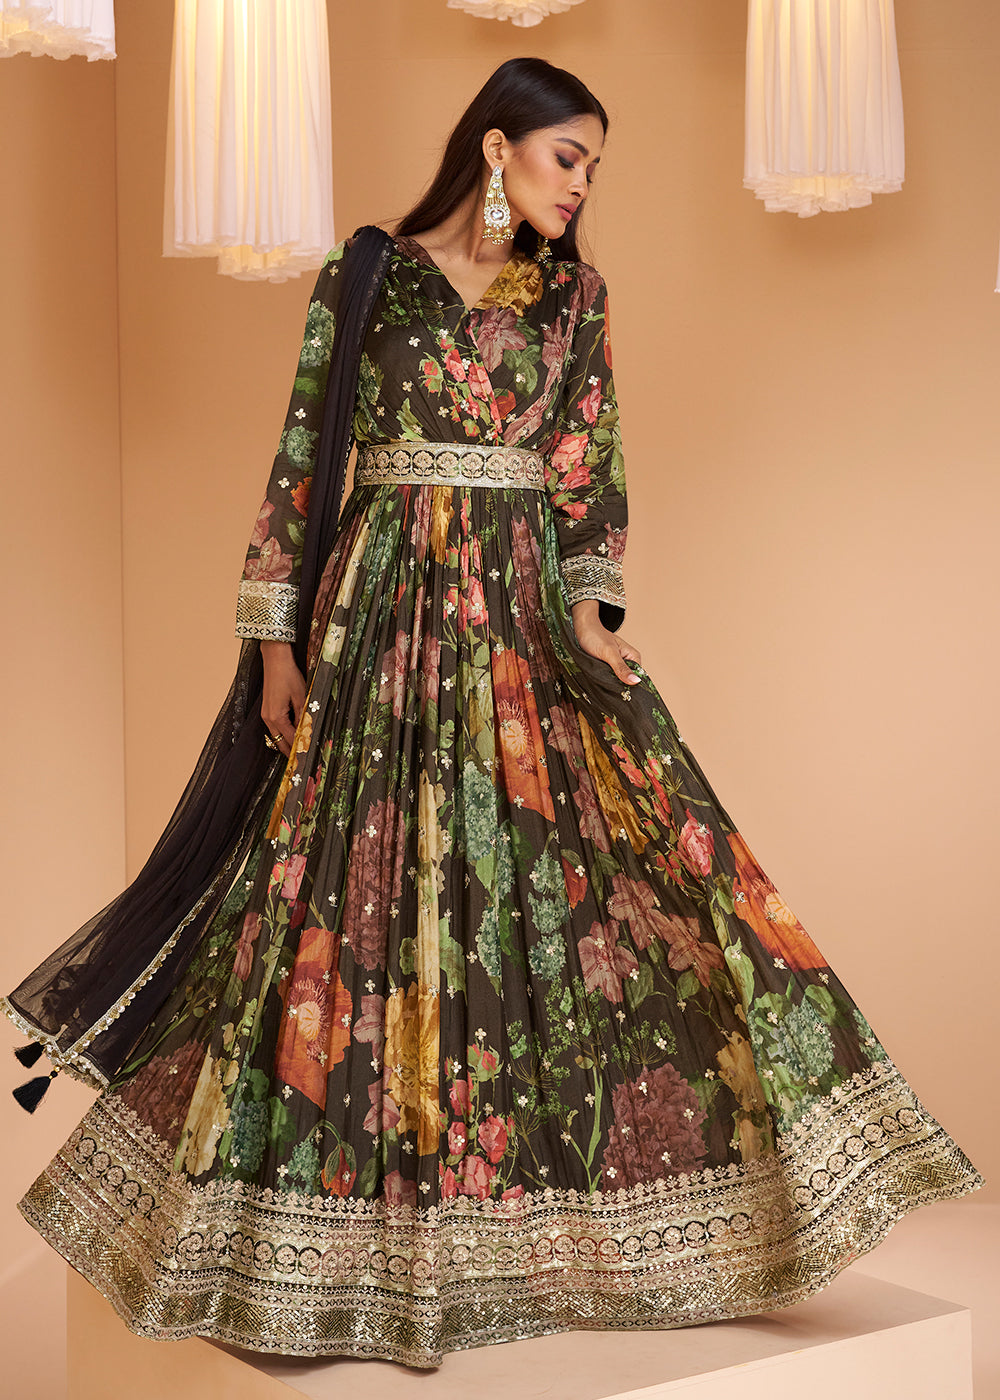 Buy Now Coffee Brown Floral Printed Wedding Festive Anarkali Gown Online in USA, UK, Australia, Canada & Worldwide at Empress Clothing.